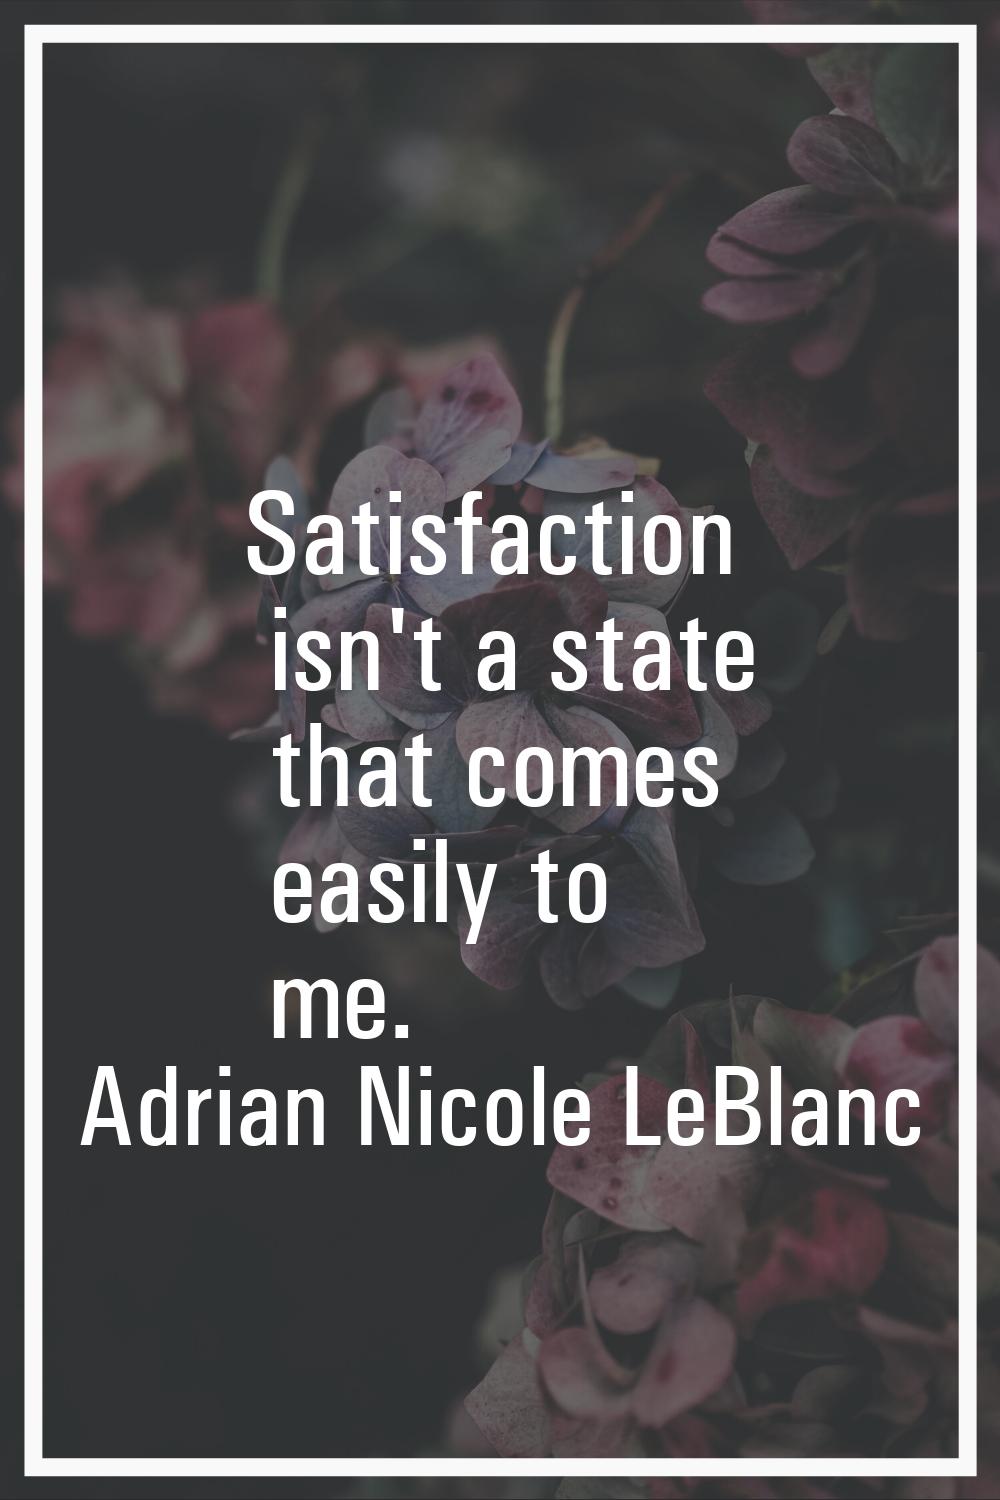 Satisfaction isn't a state that comes easily to me.